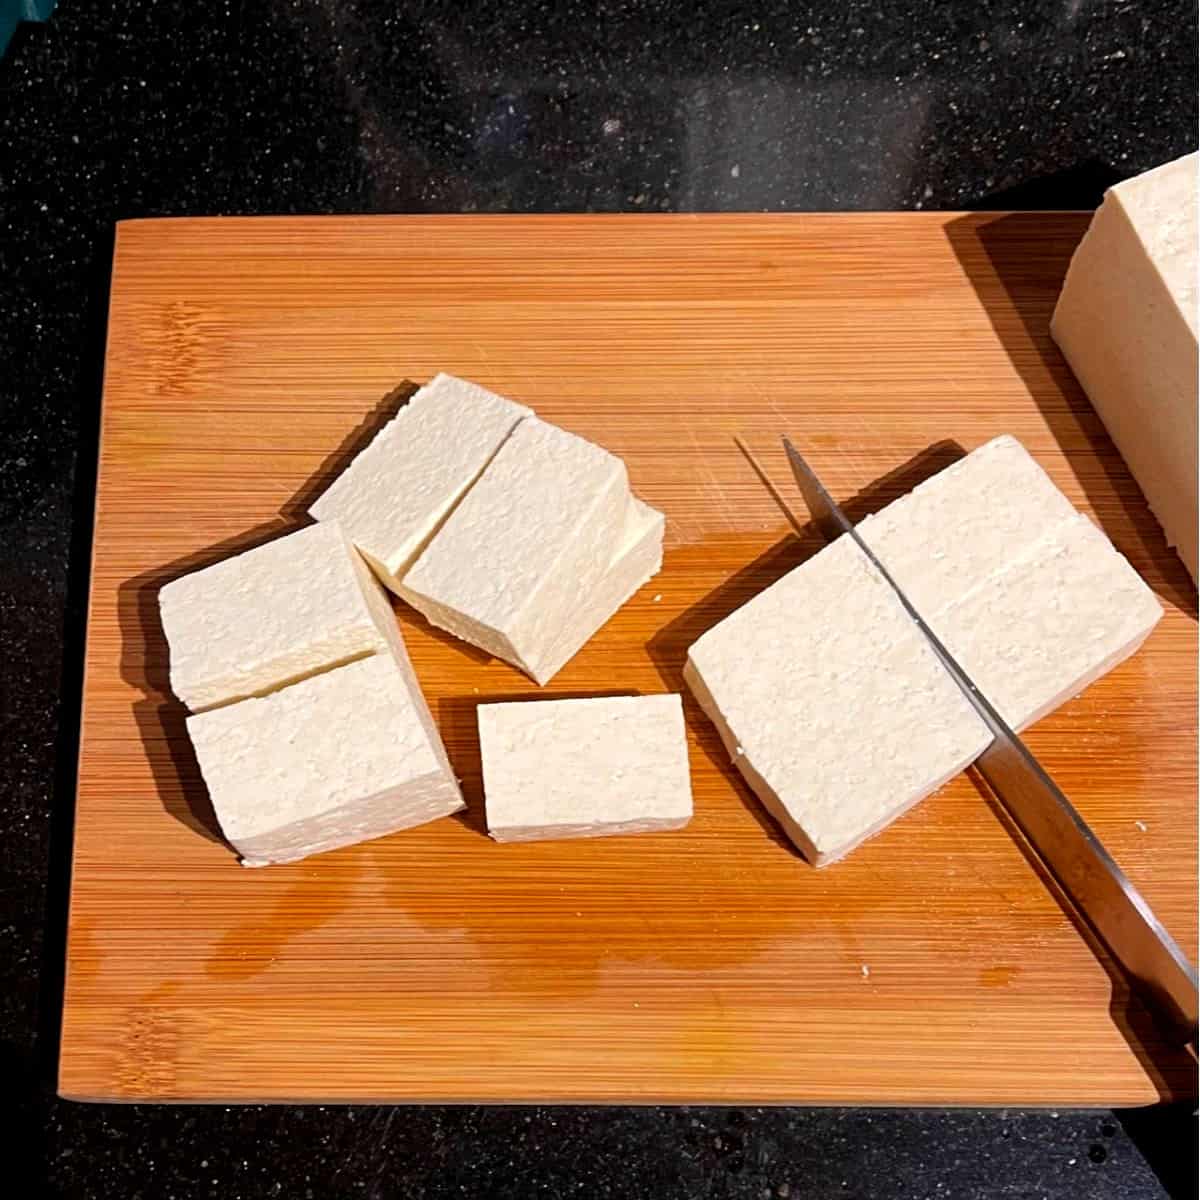 Tofu cut in slices on chopping board with knife.